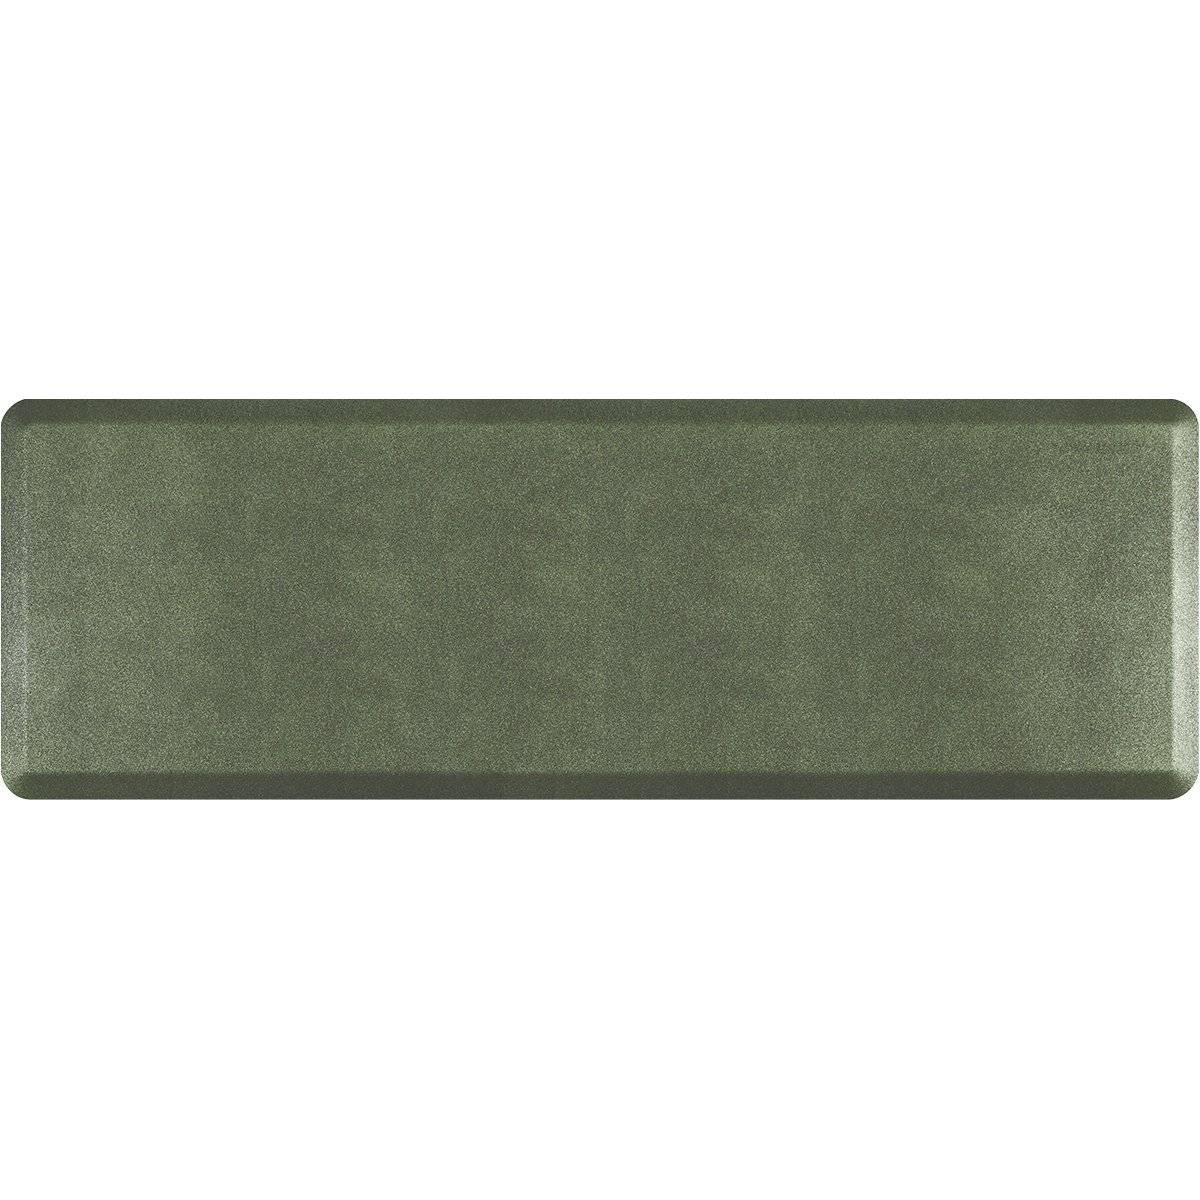 WellnessMats Granite 6'X2' 62WMRGE, Granite Emerald Wellnessmats offers high quality collections of kitchen mats and kitchen rugs.